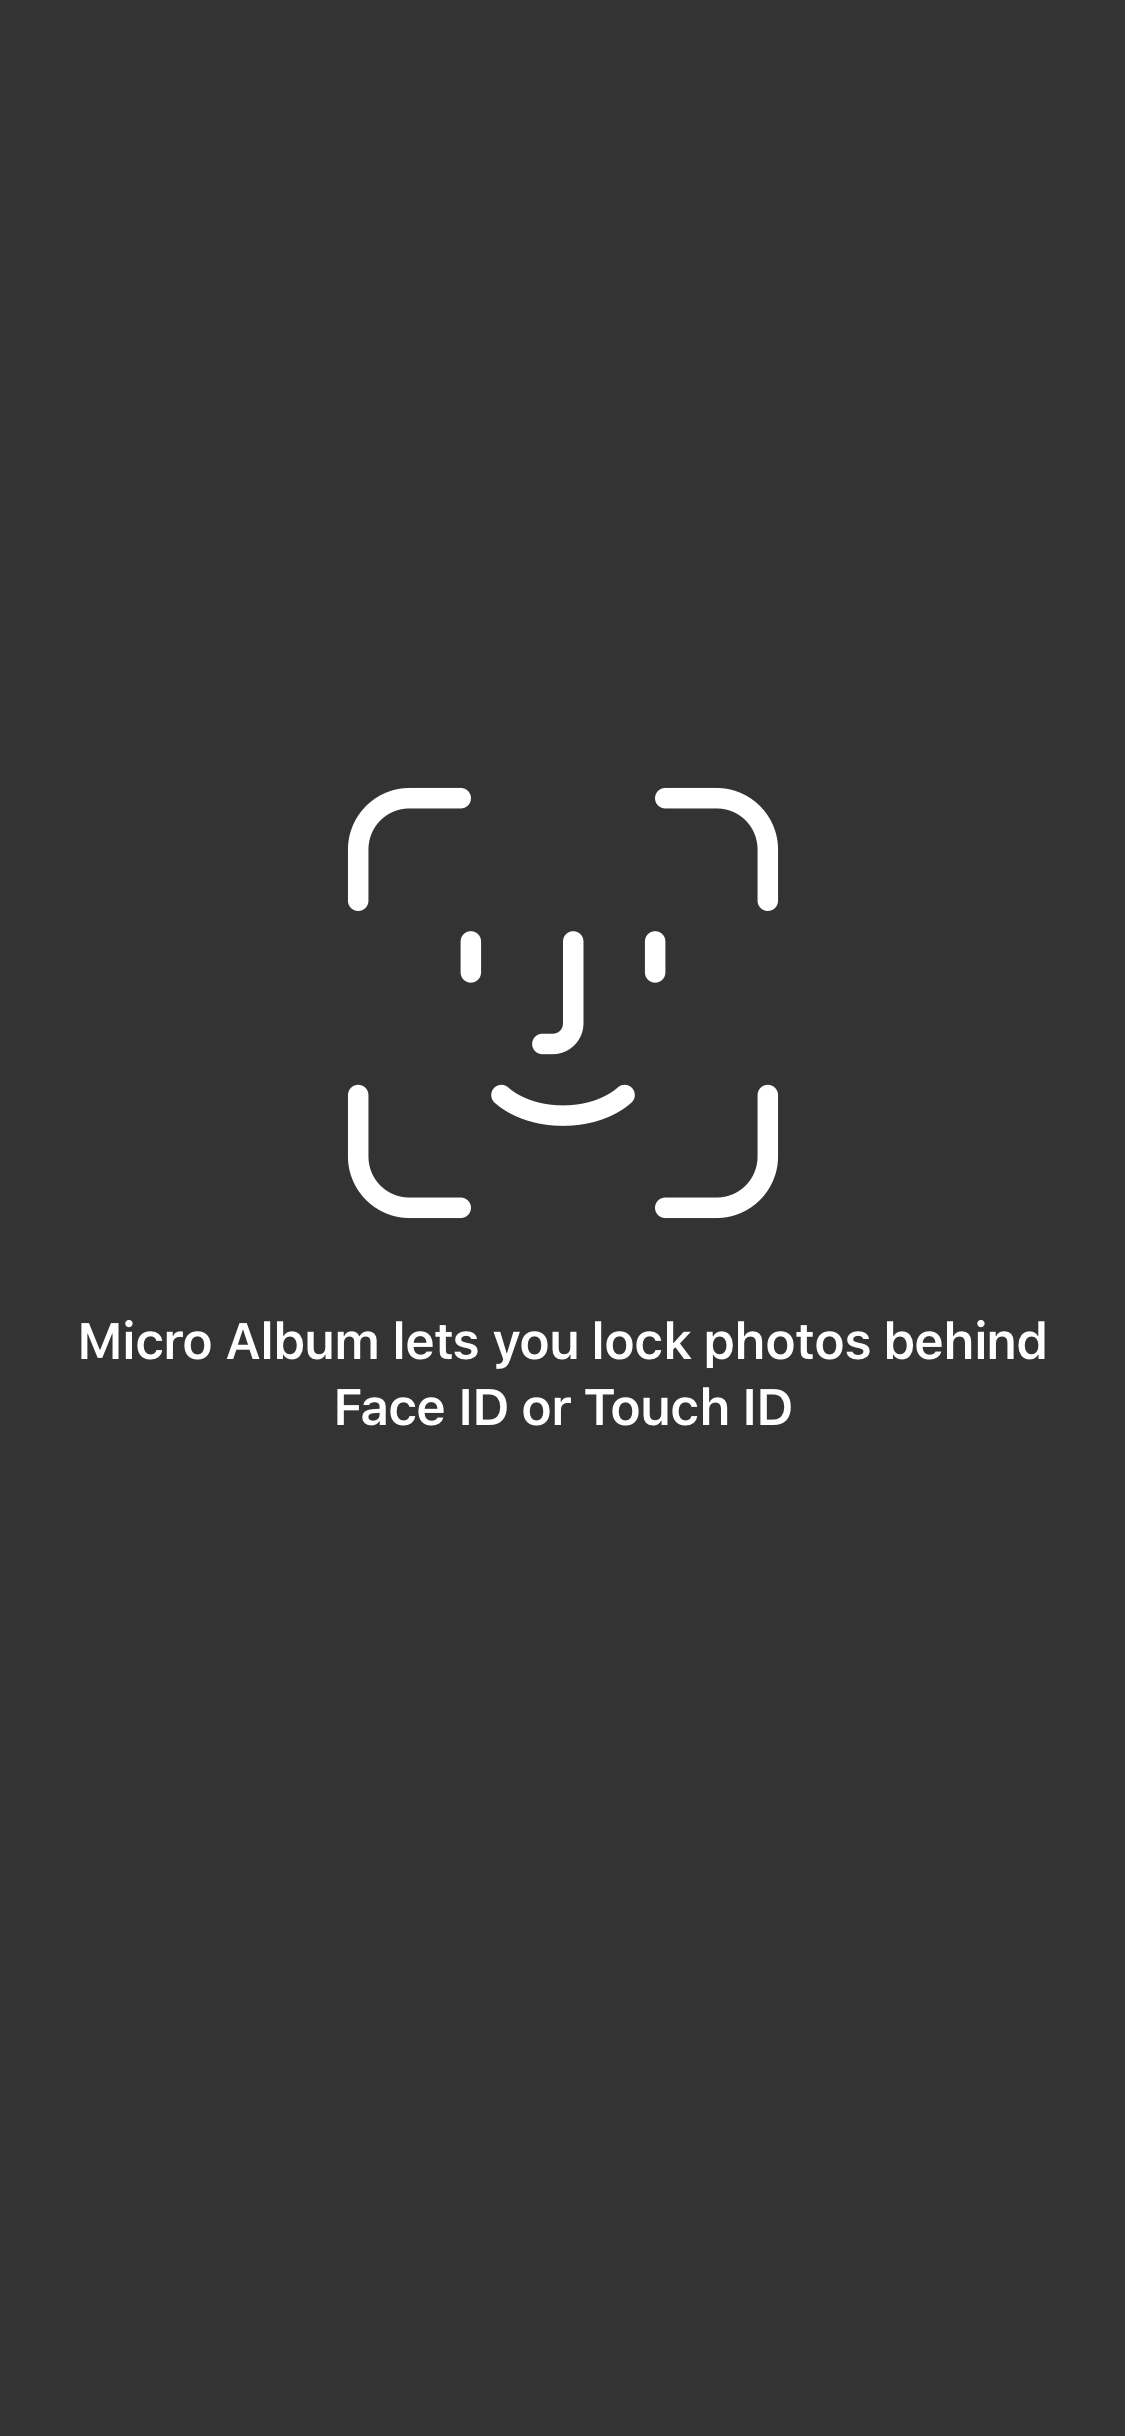 Micro Album lets you lock photos behind Face ID or Touch ID